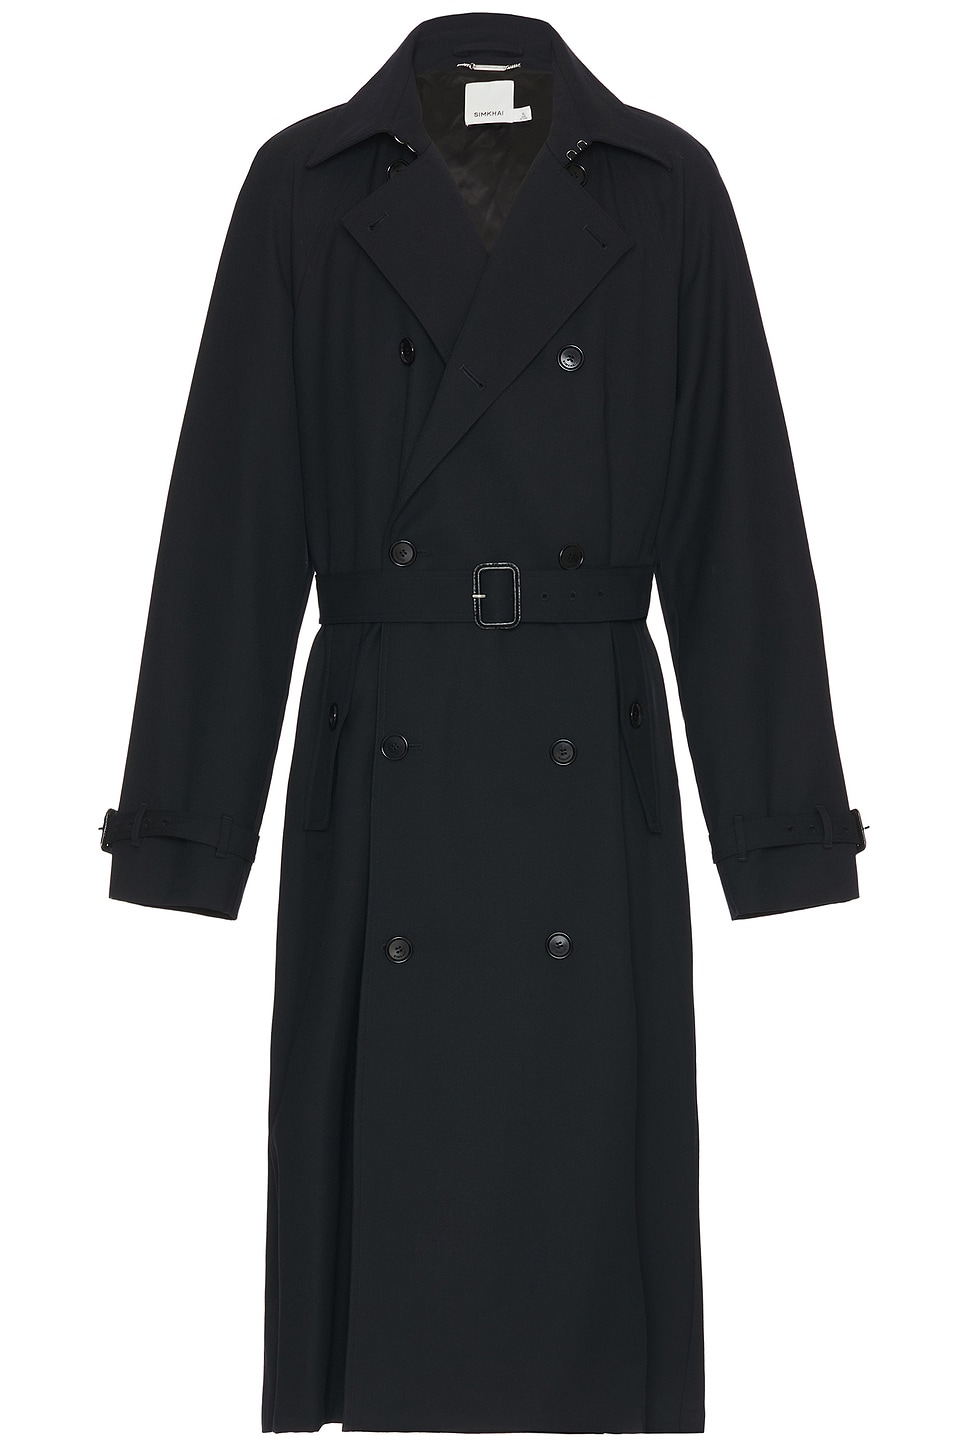 Image 1 of SIMKHAI Clive Belted Trench in Black